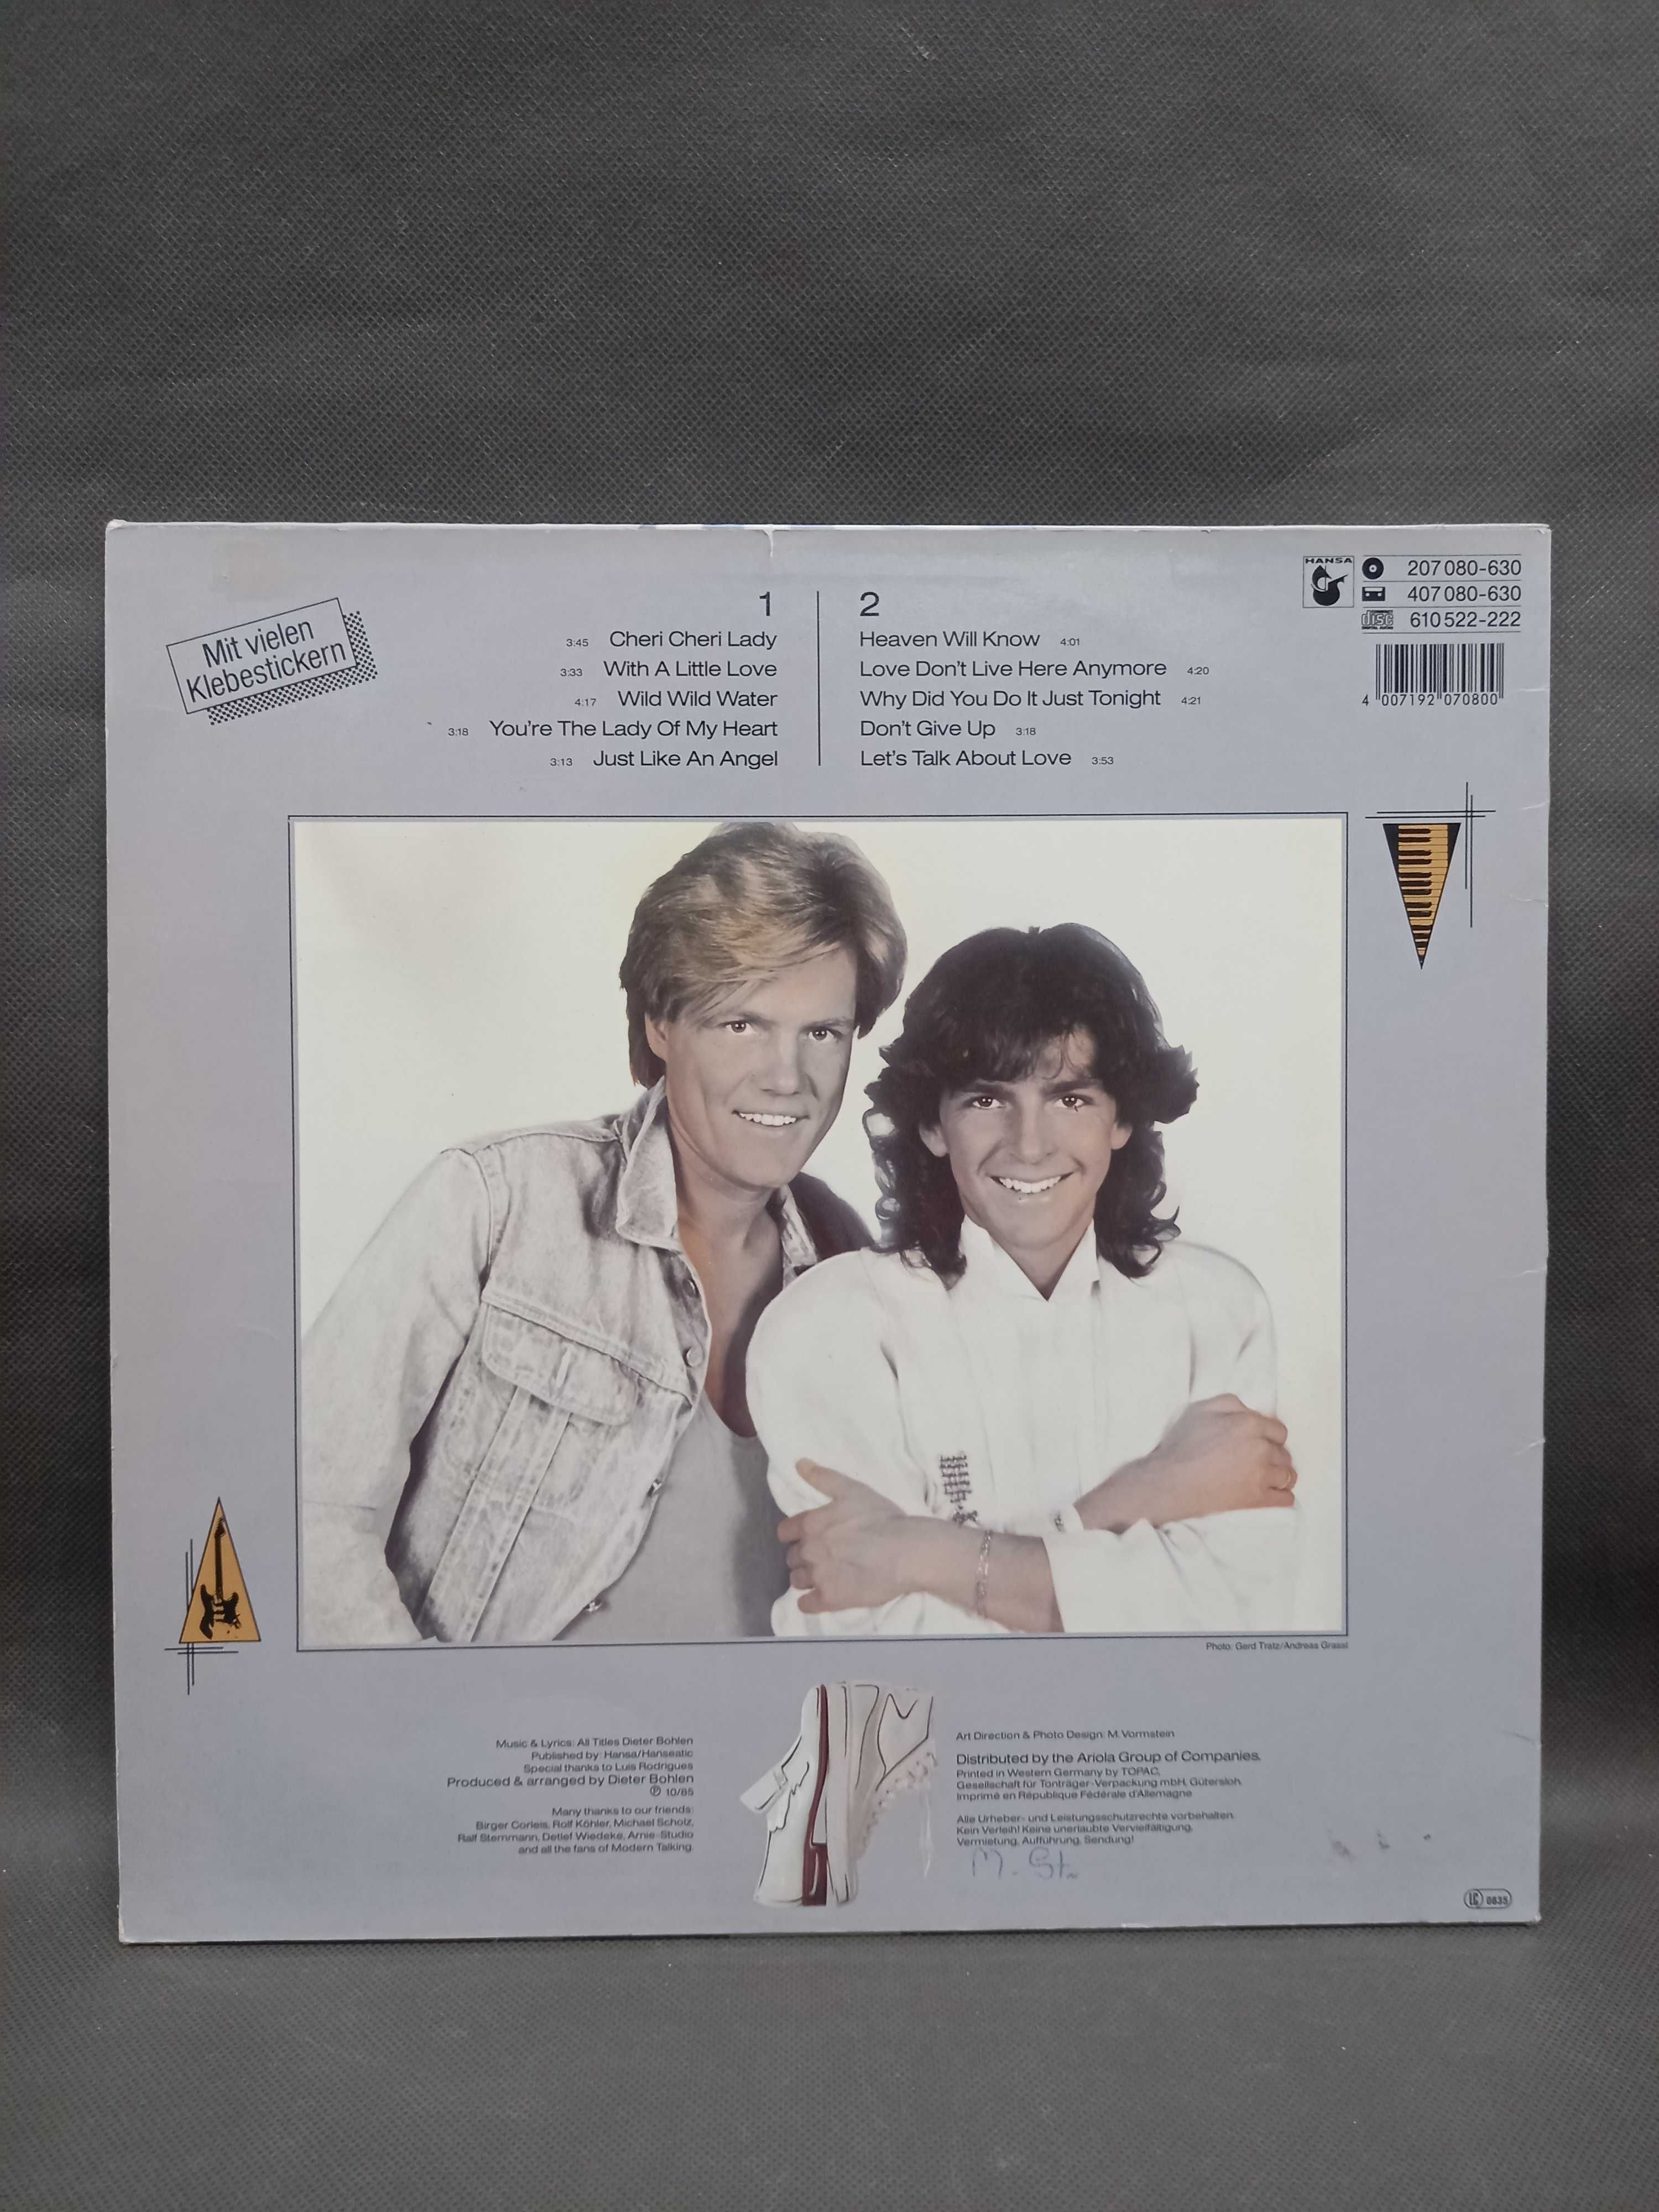 Winyl. Modern Talking – Let's Talk About Love (The 2nd Album)